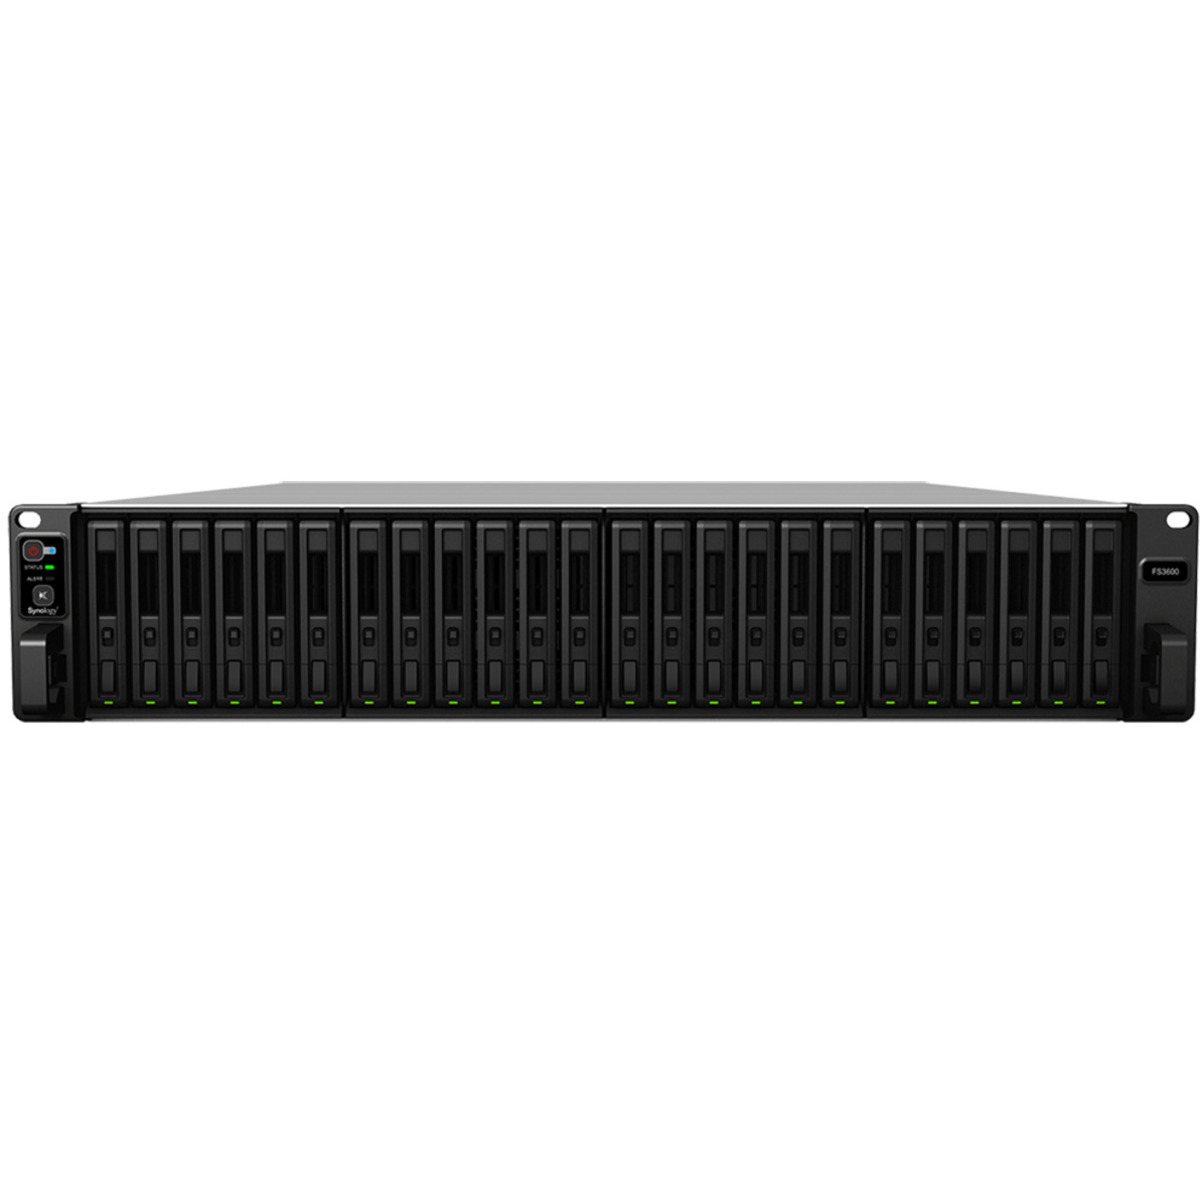 Synology FlashStation FS3600 80.6tb 24-Bay RackMount Large Business / Enterprise NAS - Network Attached Storage Device 21x3.8tb Synology SAT5210 Series SAT5210-3840G 2.5 530/500MB/s SATA 6Gb/s SSD ENTERPRISE Class Drives Installed - Burn-In Tested - FREE RAM UPGRADE FlashStation FS3600